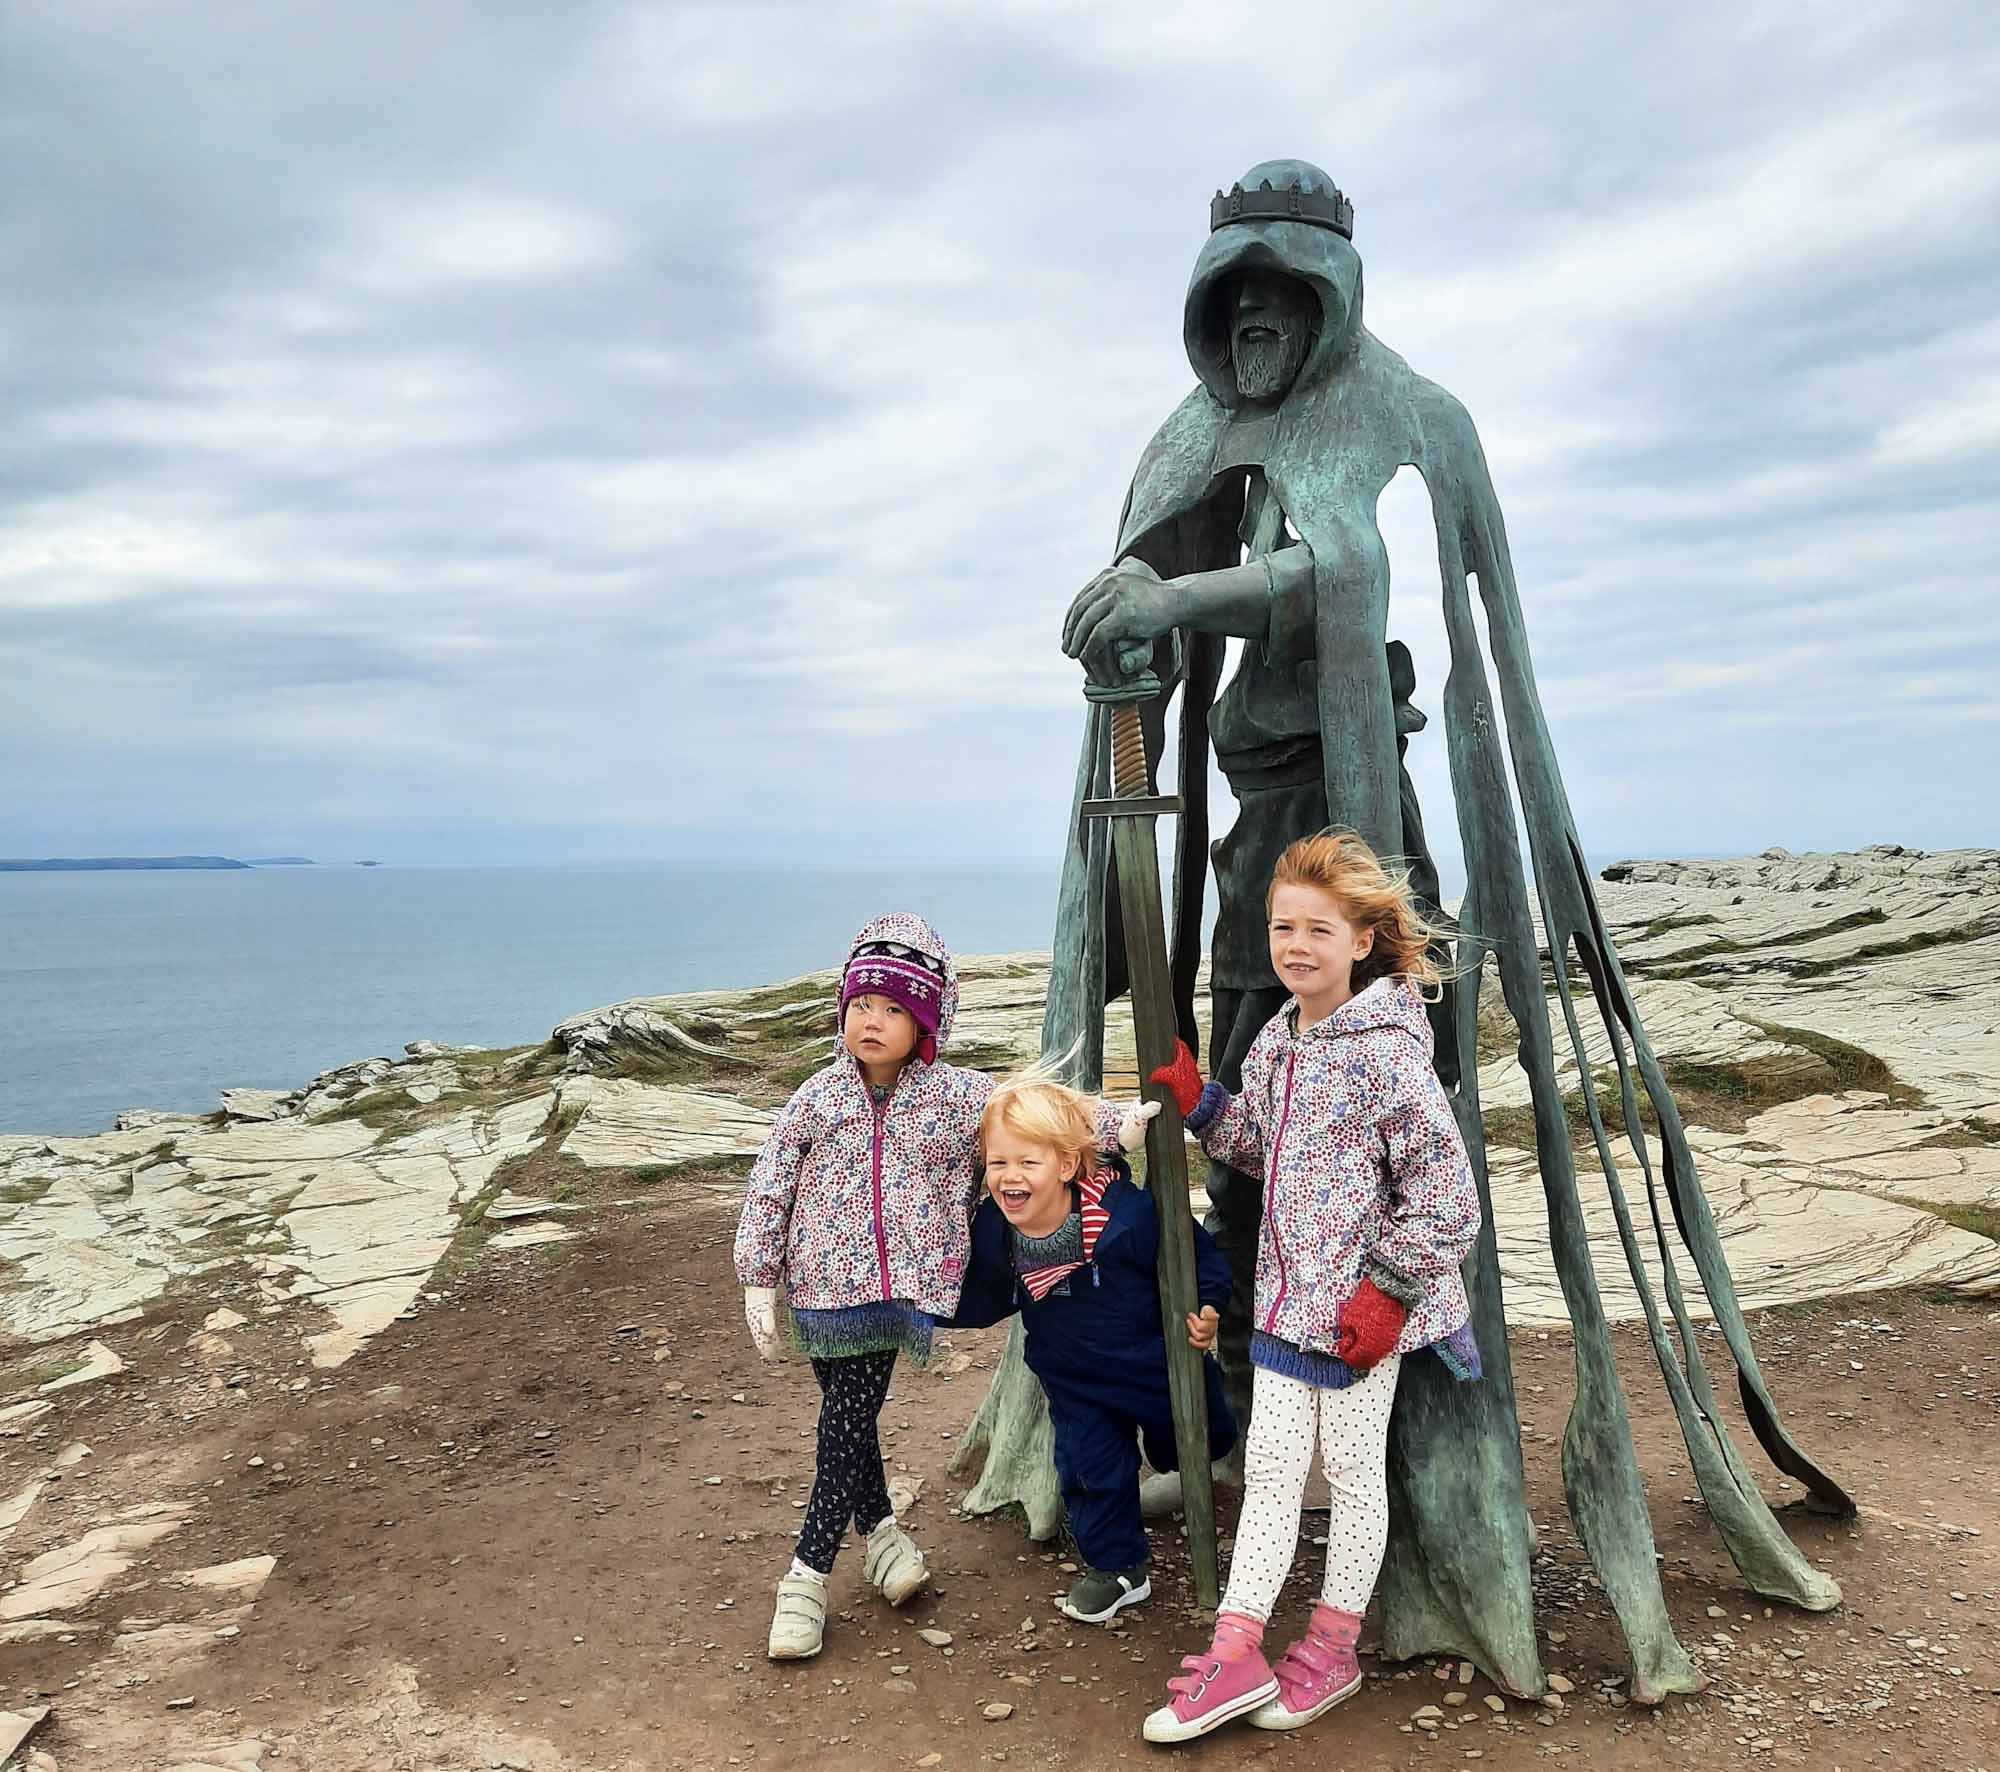 3 small children stood with a metal sculpture of King Arthur on a clifftop